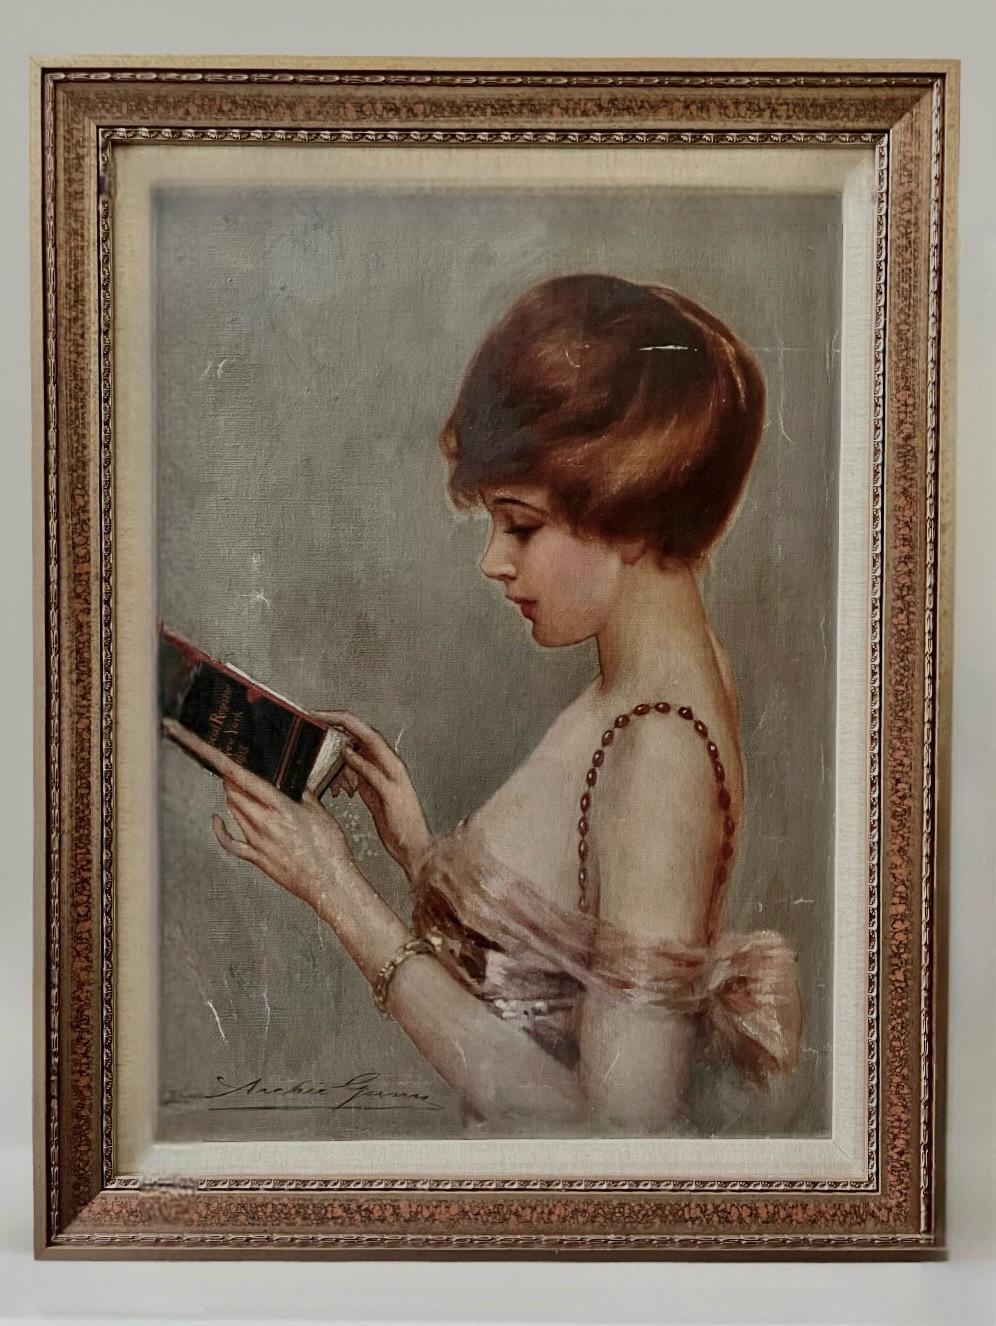 Archie Gunn, untitled oil on canvas portrait of a New York debutante, c. 1920.

An adorable young lady with auburn hair presented in profile view reading Social Register of New York book, 1918. Housed in a decorated wood frame with double gilt trim.